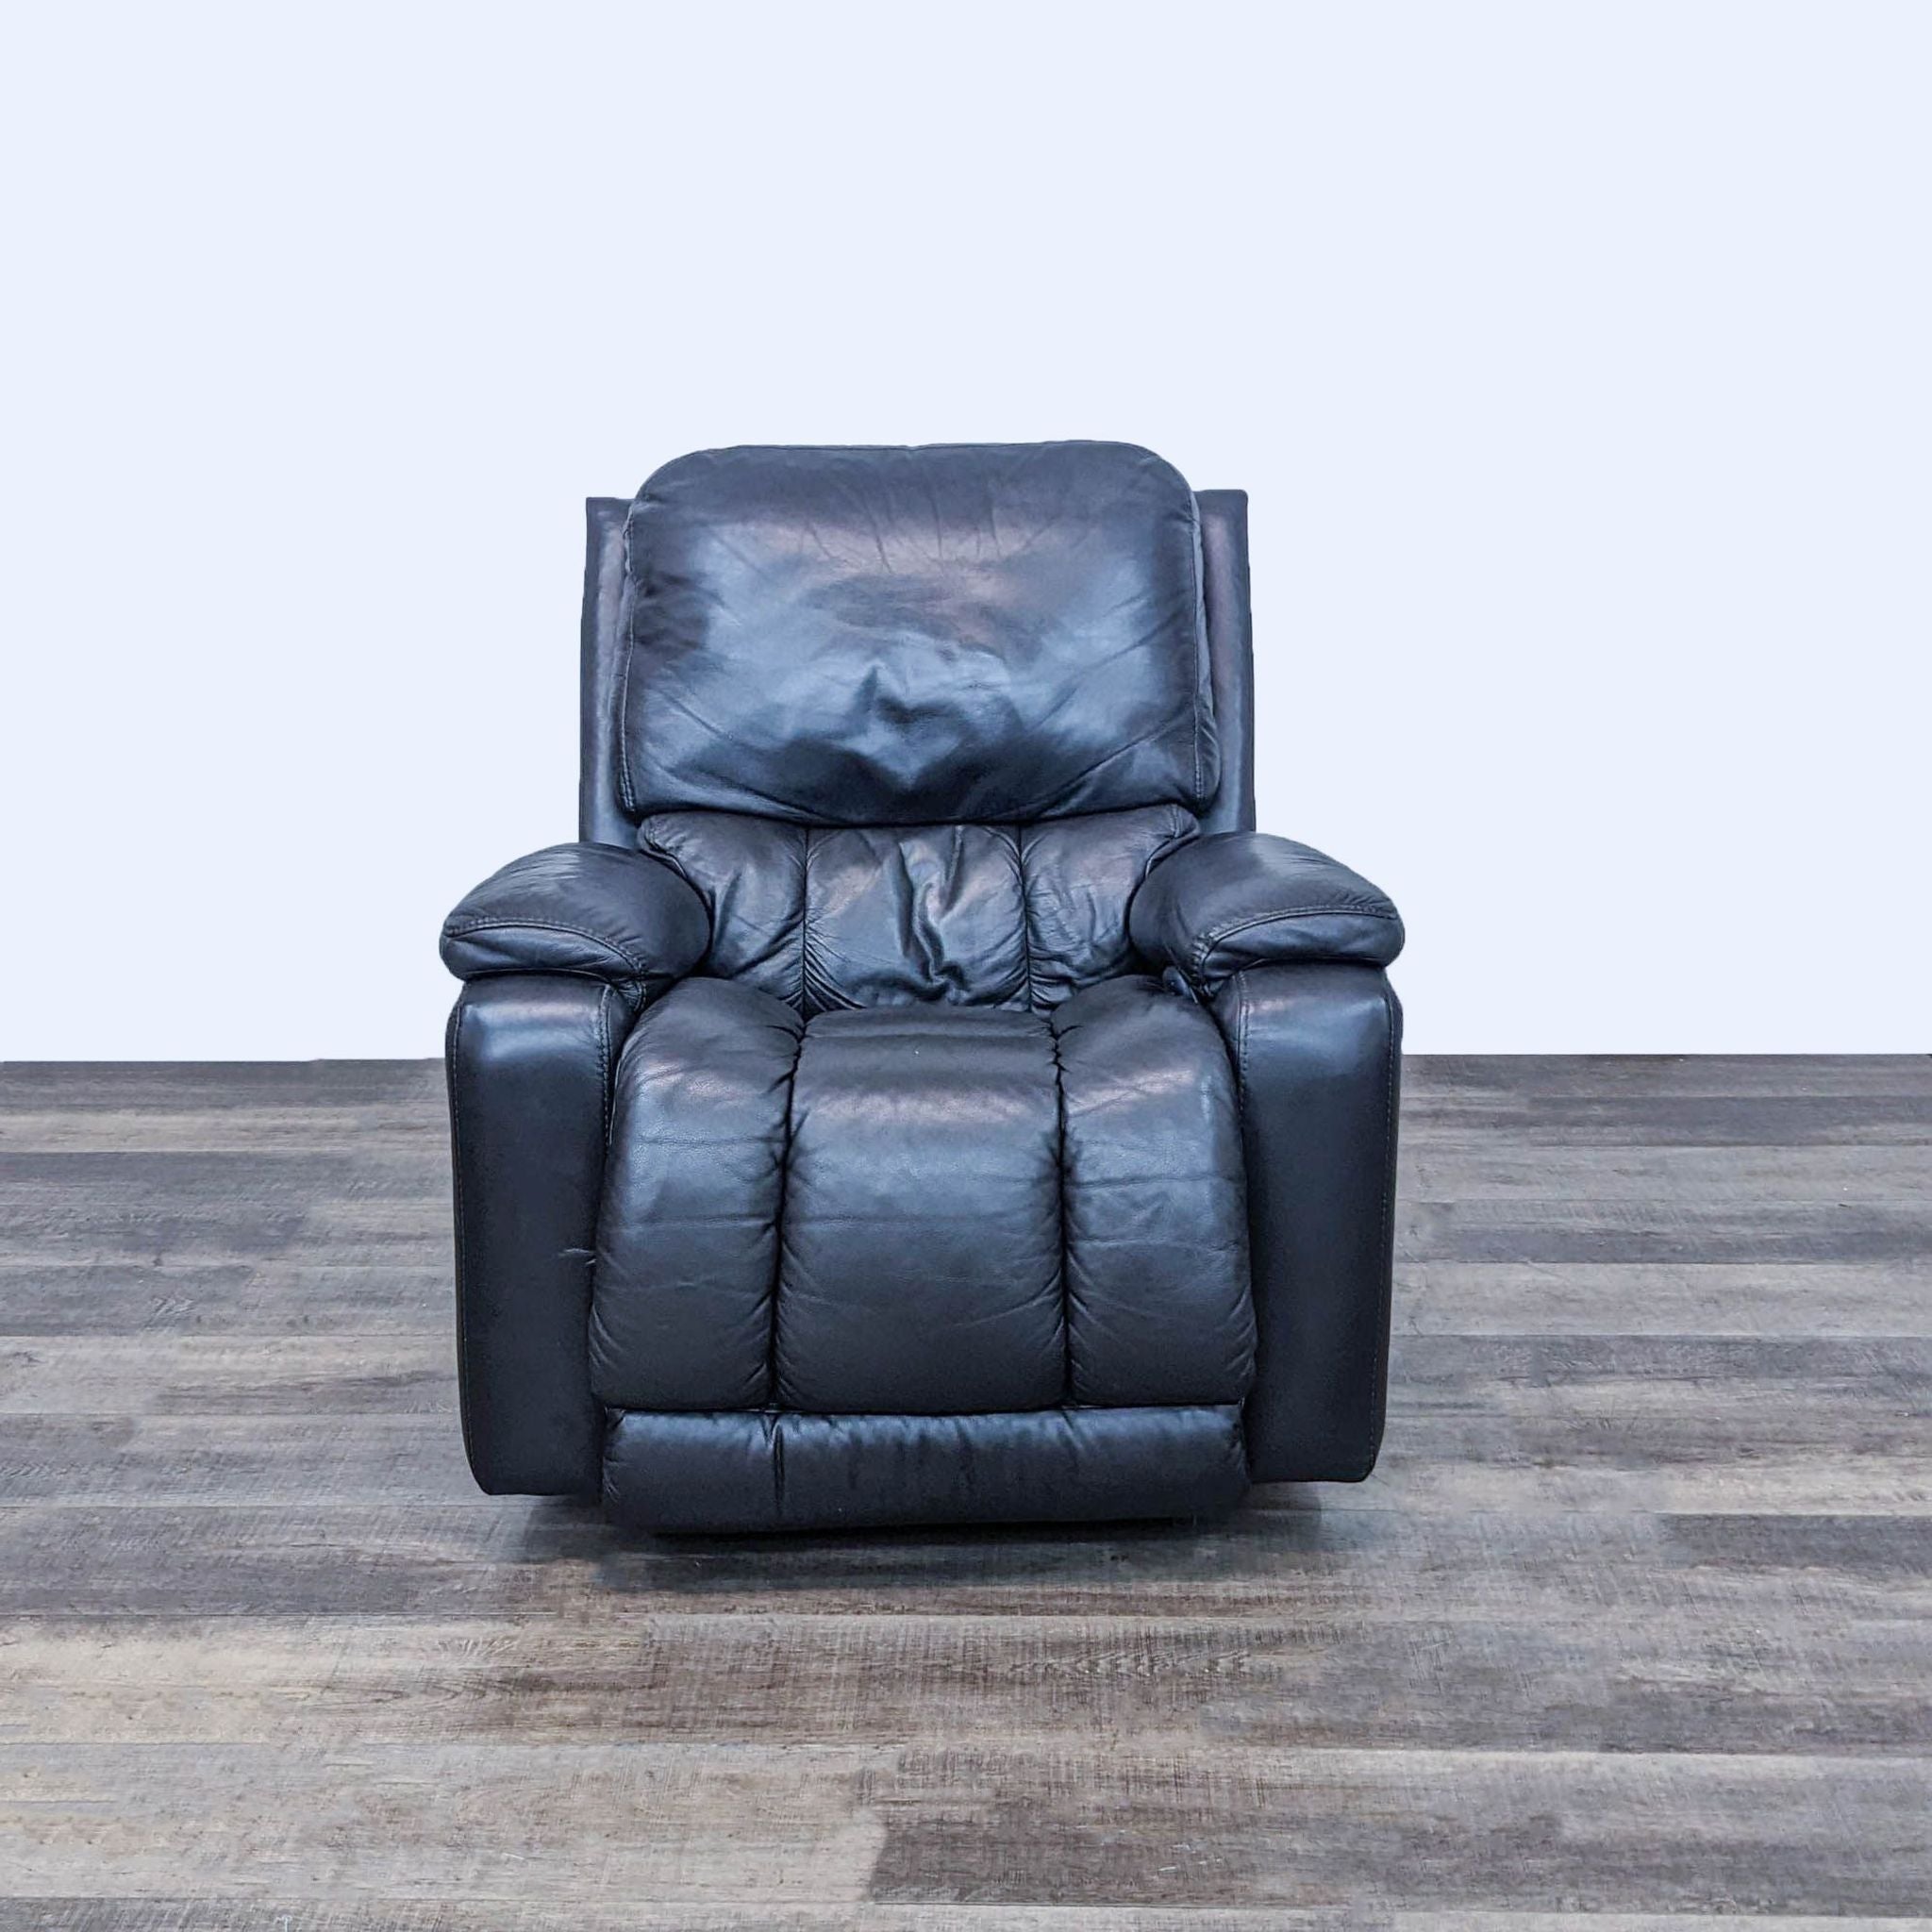 La-Z-Boy Greyson power recliner in Grey Stone, showcasing contemporary curves and bucket chaise seat, with hardwood floor background.